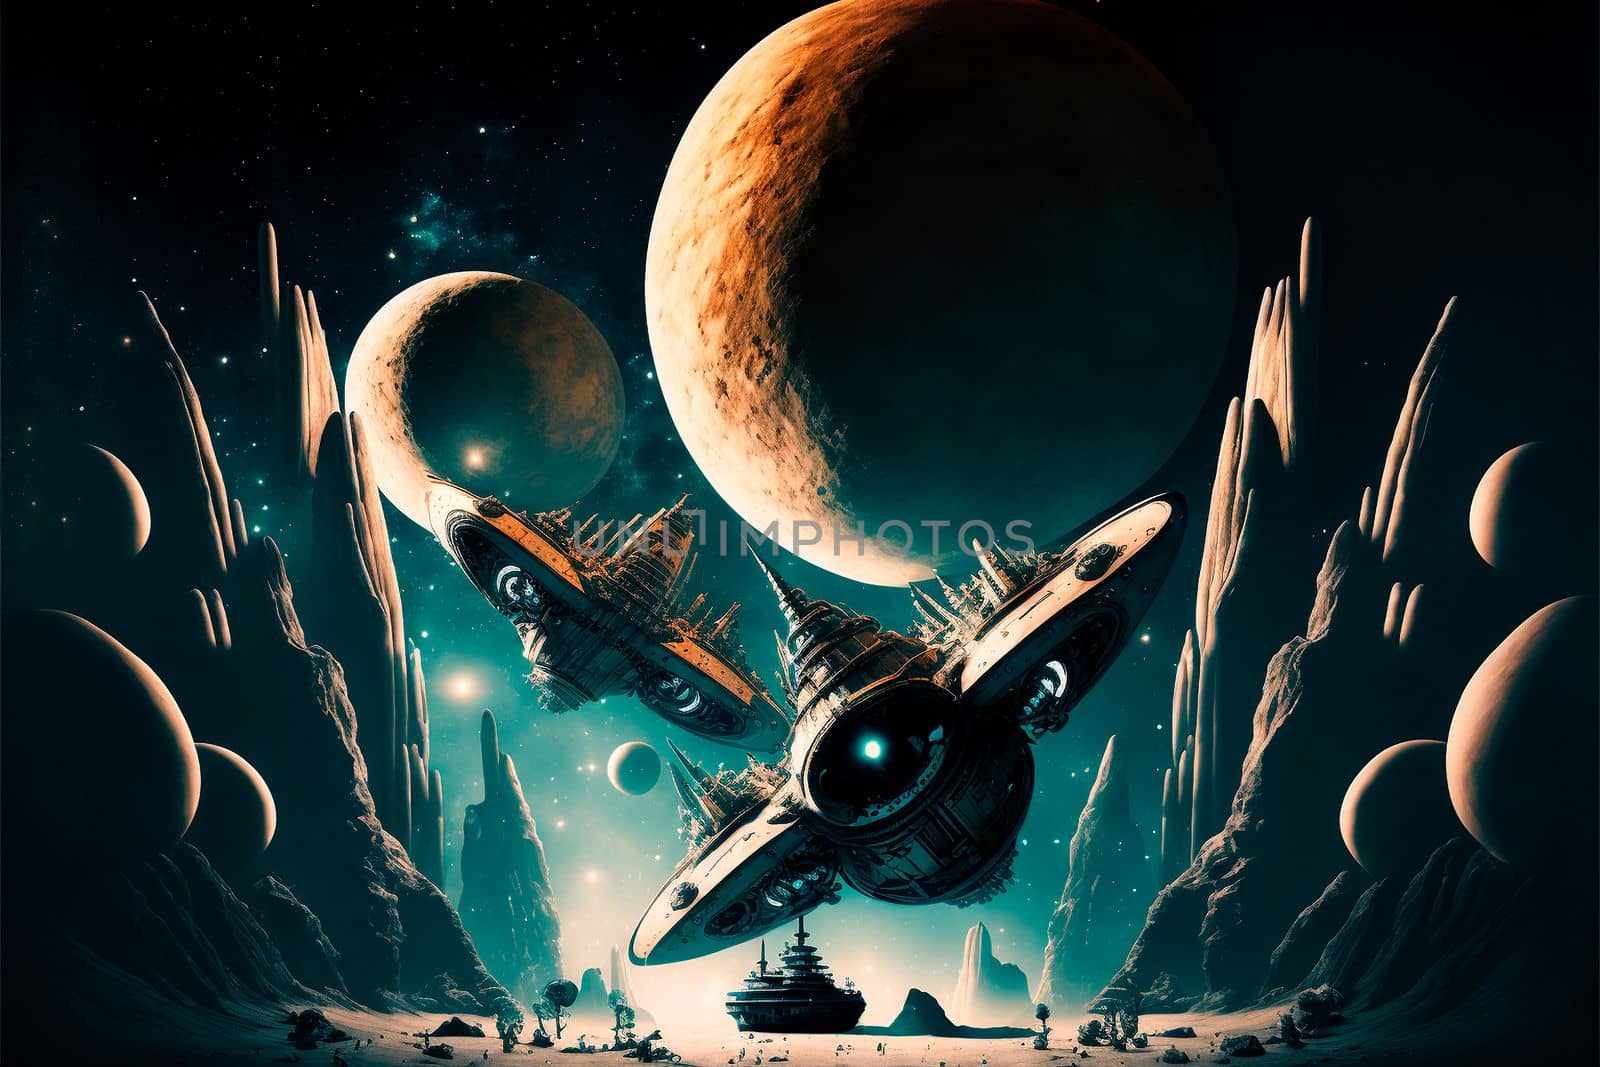 intergalactic spaceships on the background of planets and space by NeuroSky